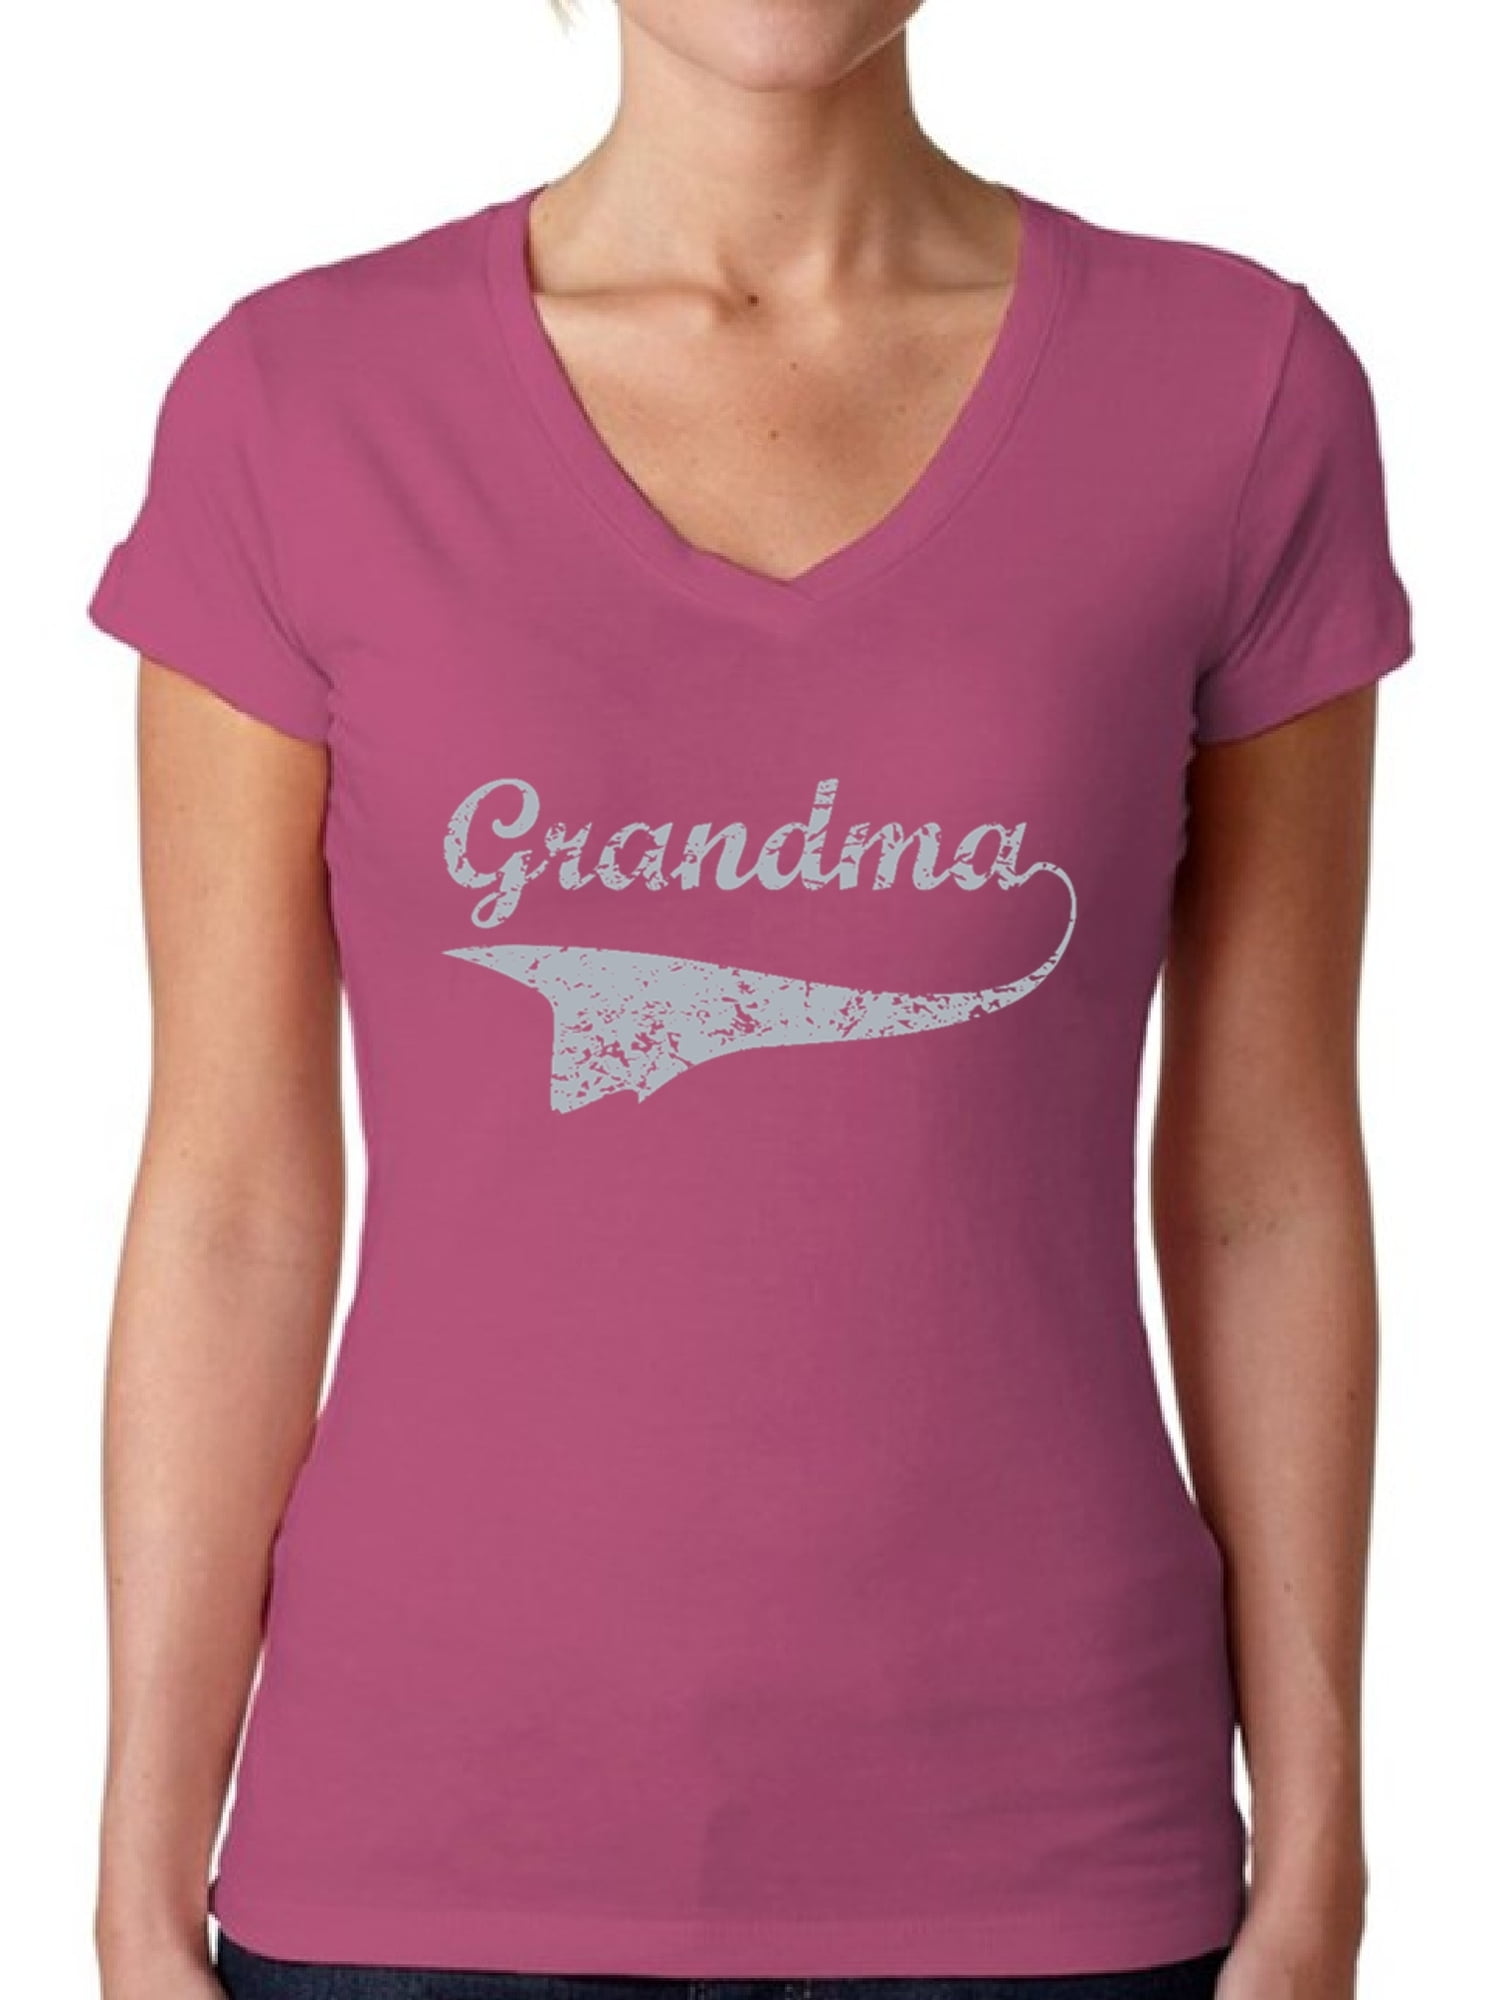 The Family That Goes Fishing Together Stays Together Women's Ideal Racerback Tank Fishing gift Fishing family's gift Camping Outdoors